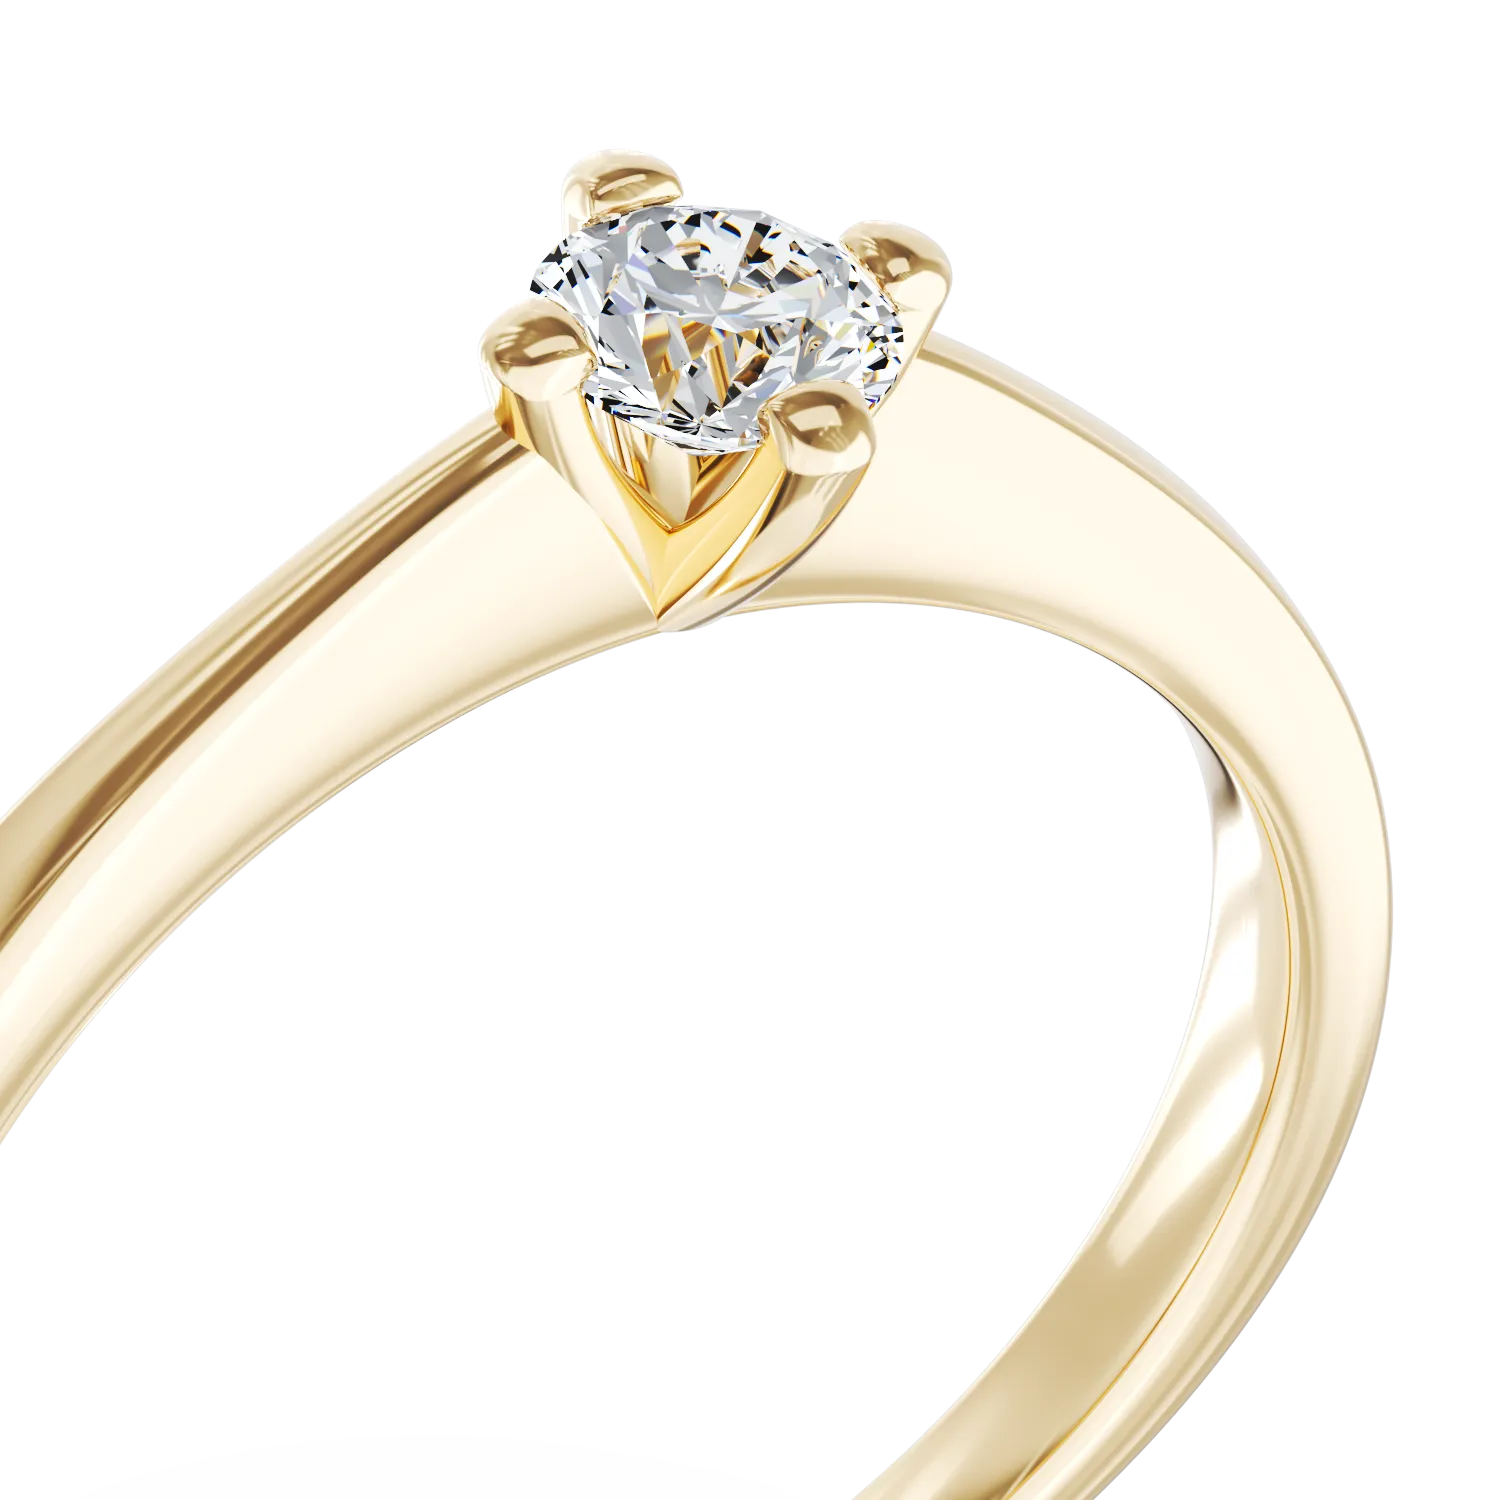 18K yellow gold engagement ring with a 0.2ct solitaire diamond